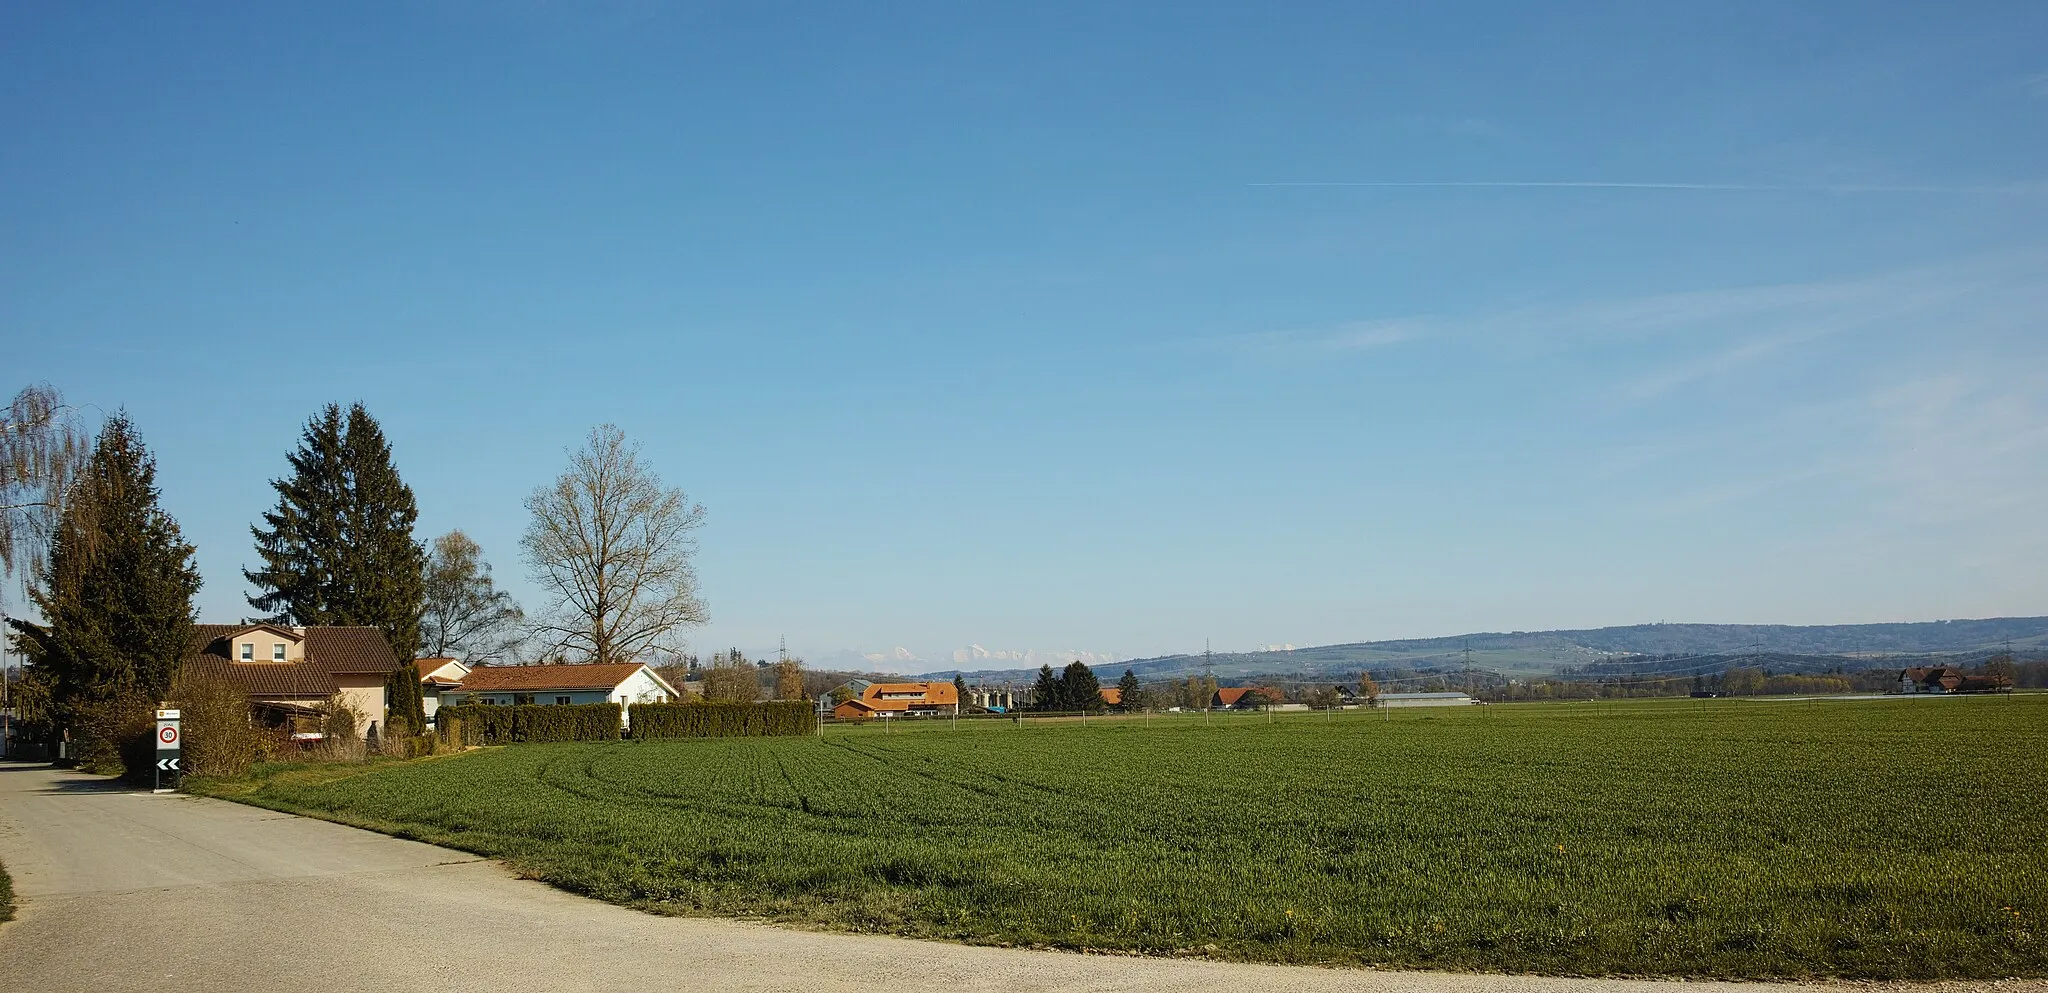 Photo showing: View of a field near Worben, canton of Bern, Switzerland, with some houses of Worben. In the background, the Bernese Alps are visible.